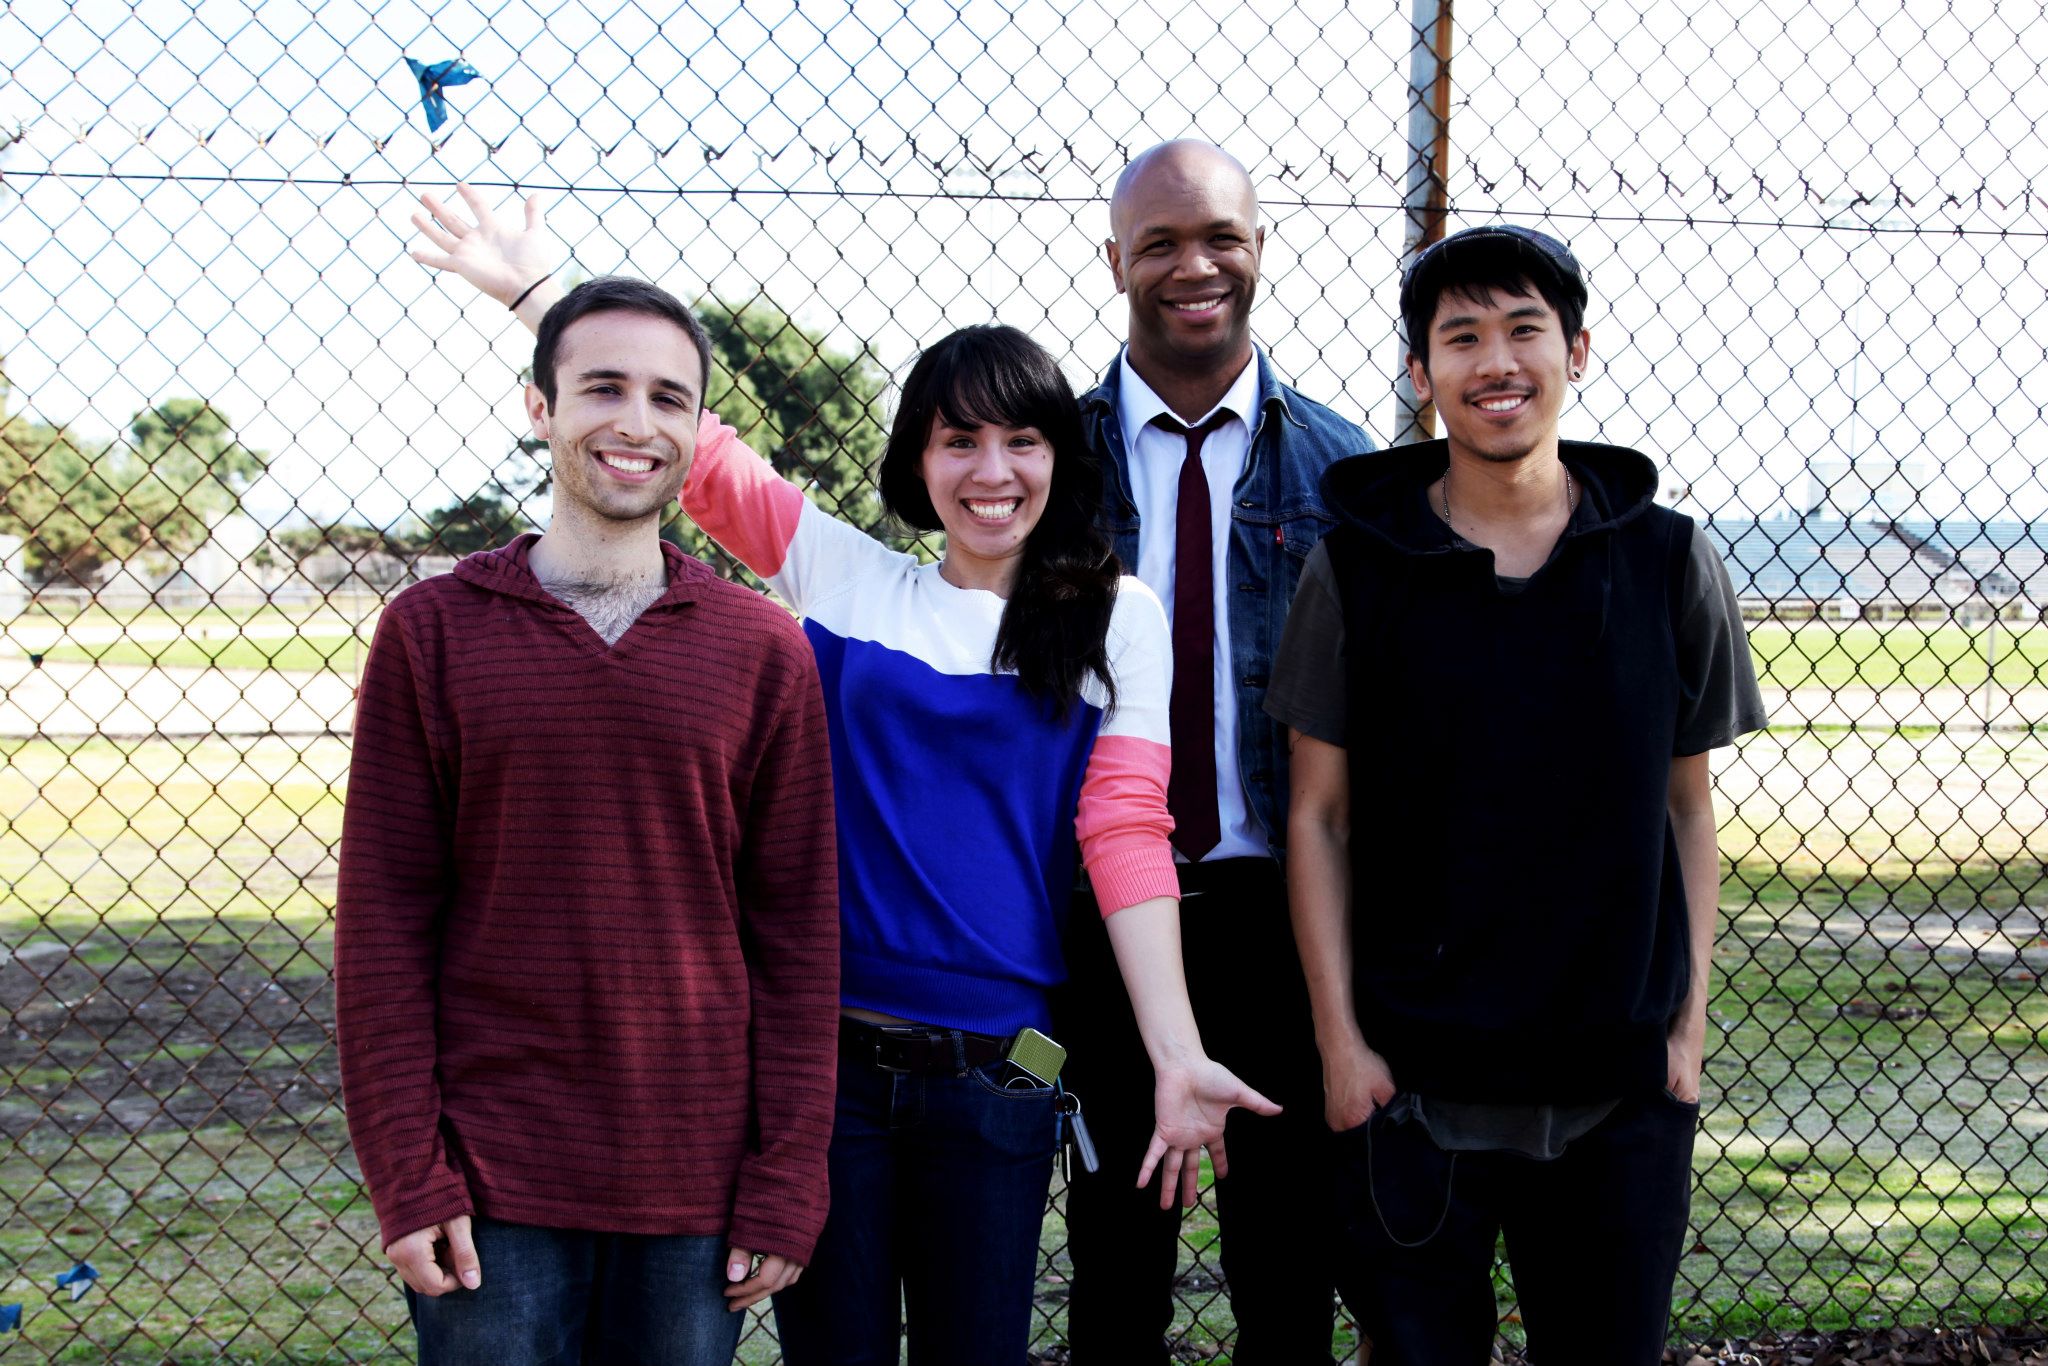 The Drop Off Cast with Eddie Vona, Director JoAnn Do Hockersmith, Isaac Johnson, and Lawrence Kao